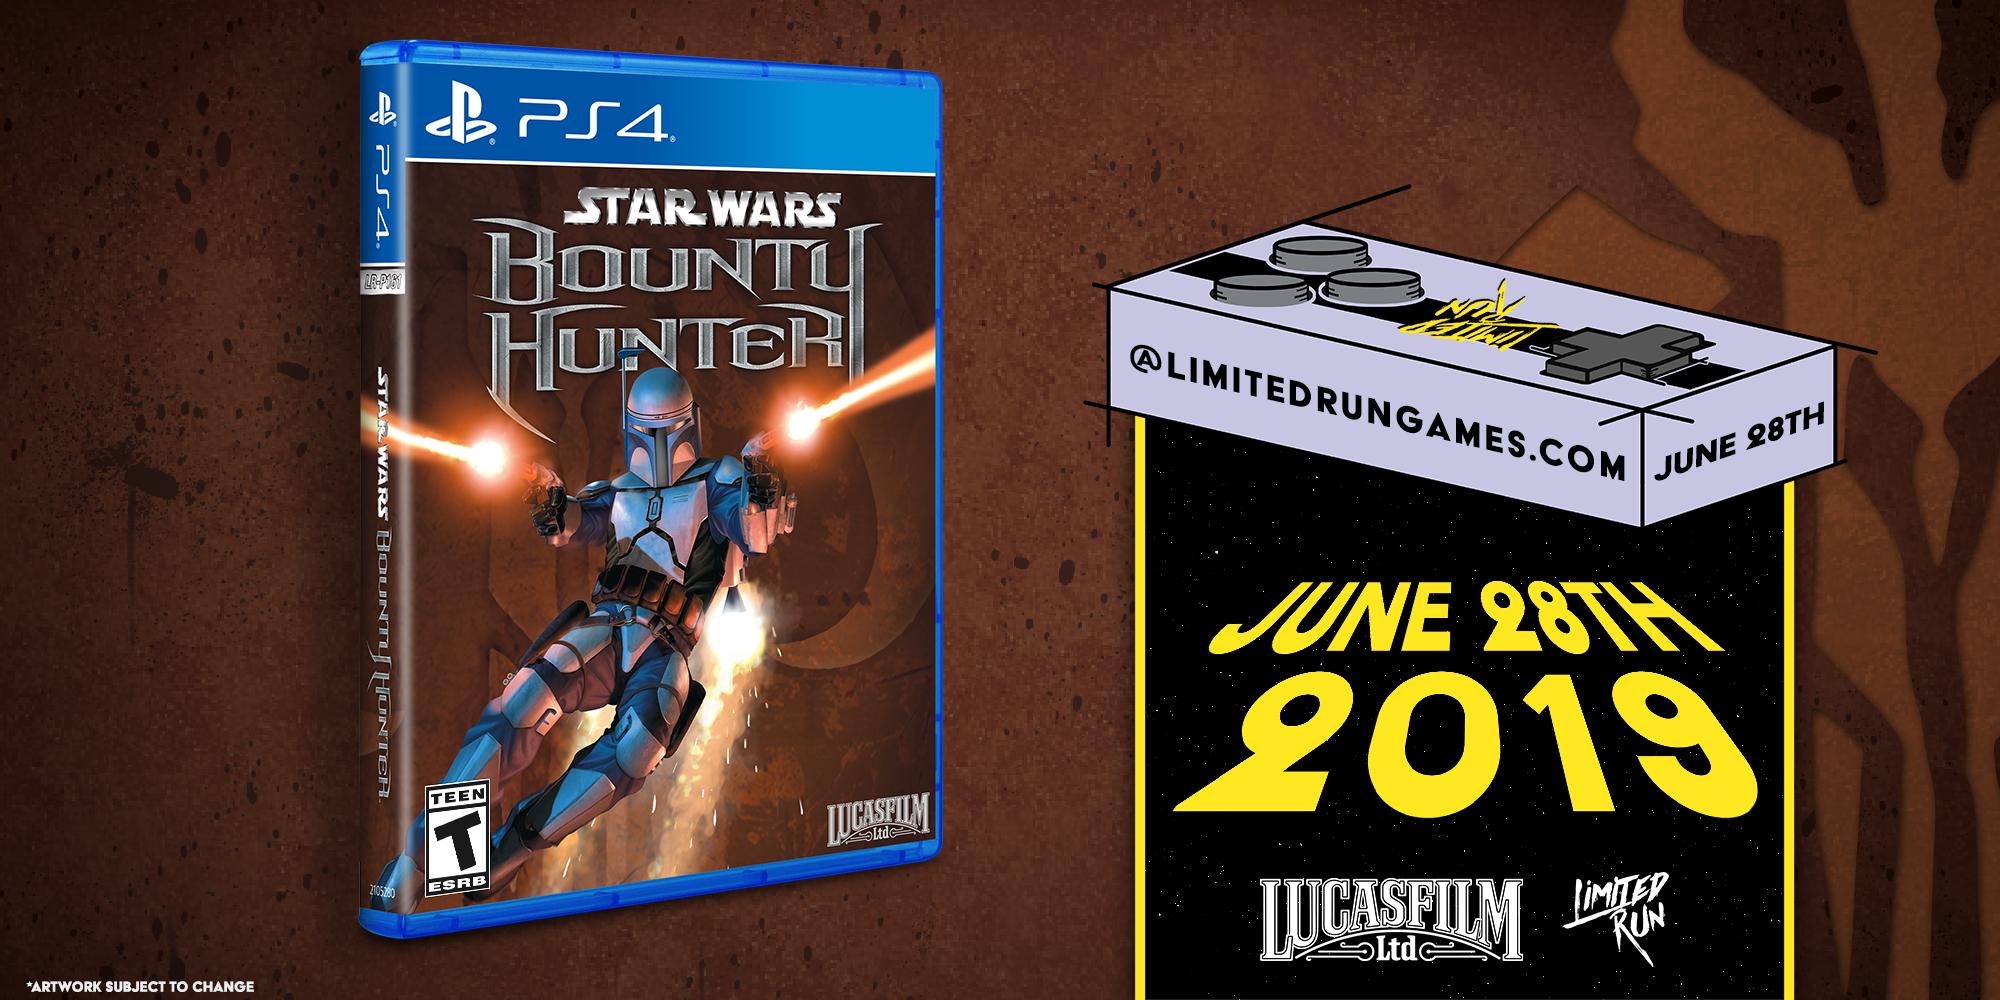 Limited Run Games on Twitter: "We'll be kicking off our collaboration with Lucasfilm Games on Friday, June 28 with WARS™: Bounty Hunter (PS4) and STAR WARS™ (NES, GameBoy). Limited quantity Standard